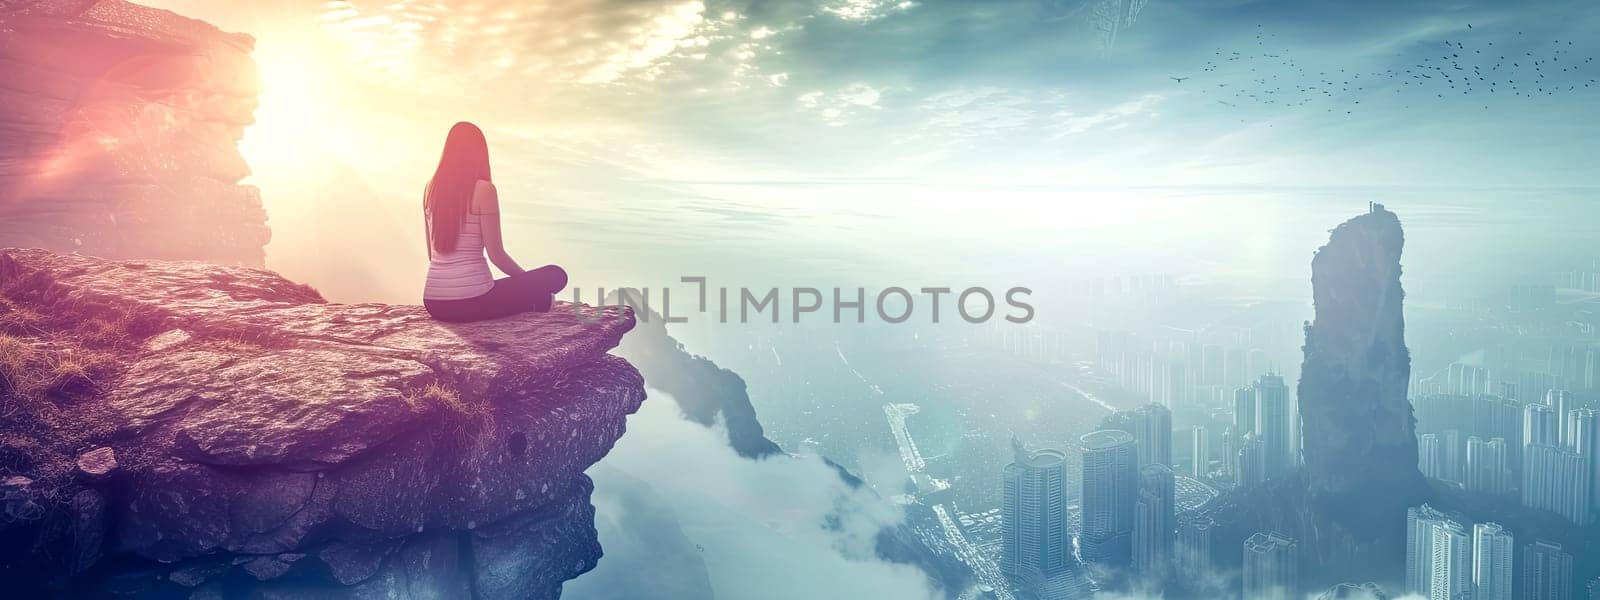 A woman perched on the cliffs edge gazes at the city below, with the sky filled with cumulus clouds and the horizon painted in shades of liquid blue